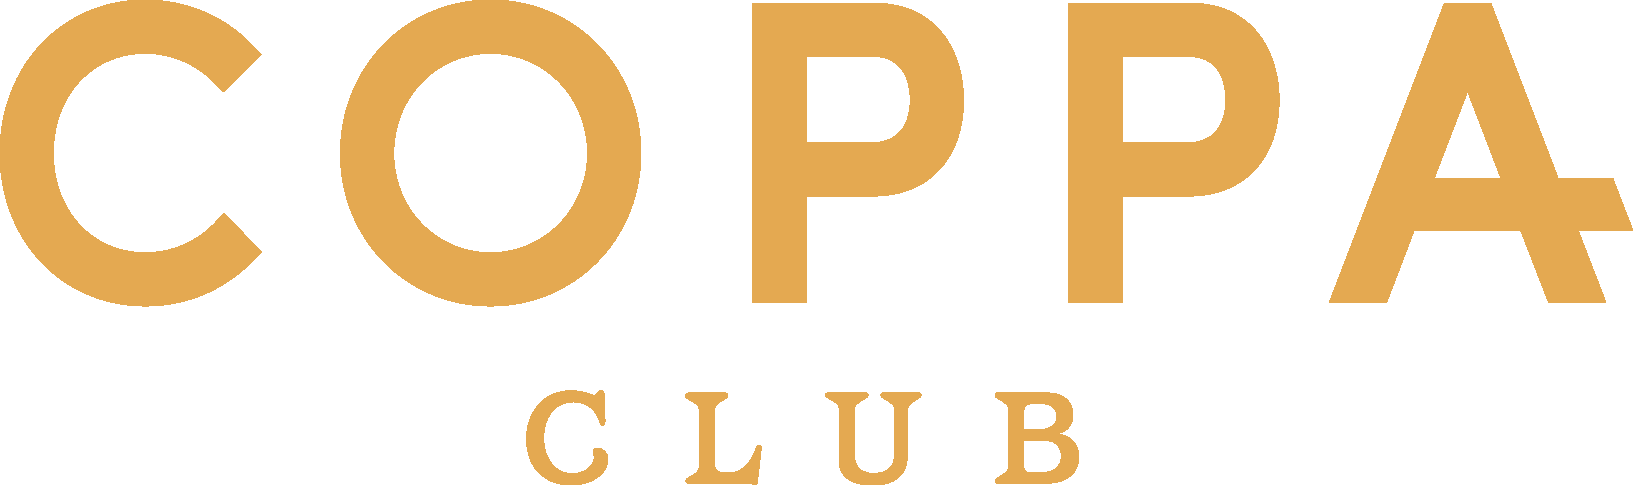 Coppa-Club-Various-Eateries-Trapeze-Media.png